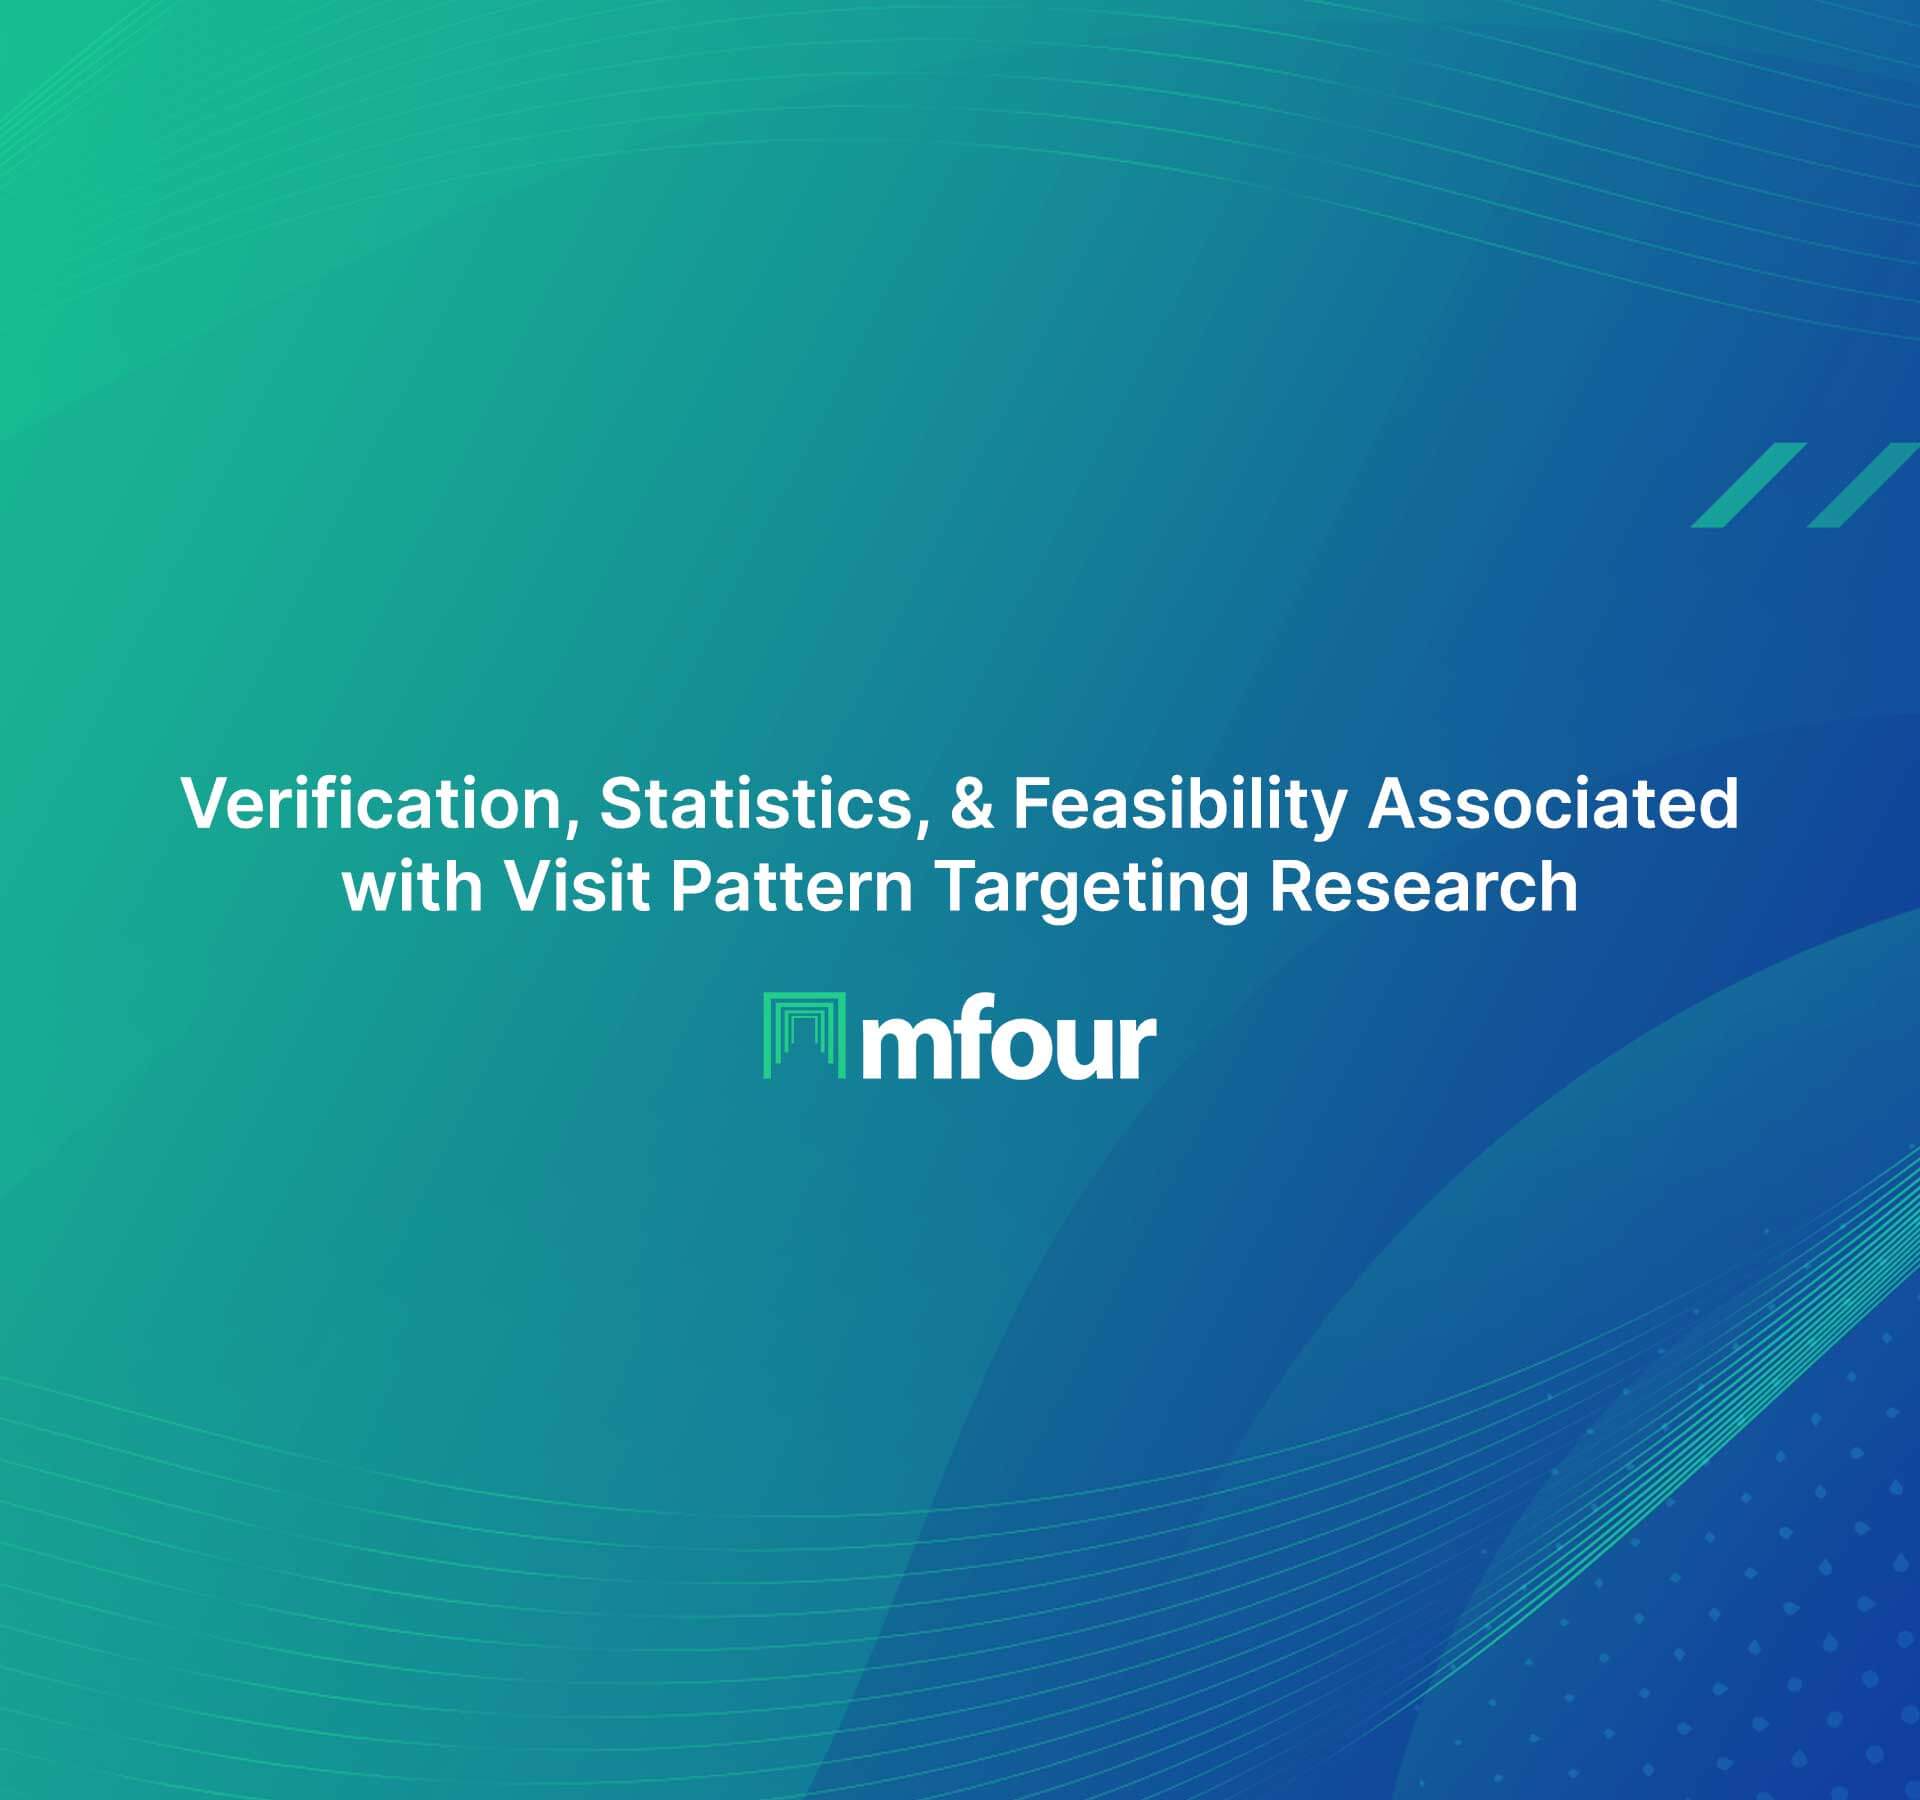 Visit Pattern Targeting, The Future of Market Research.